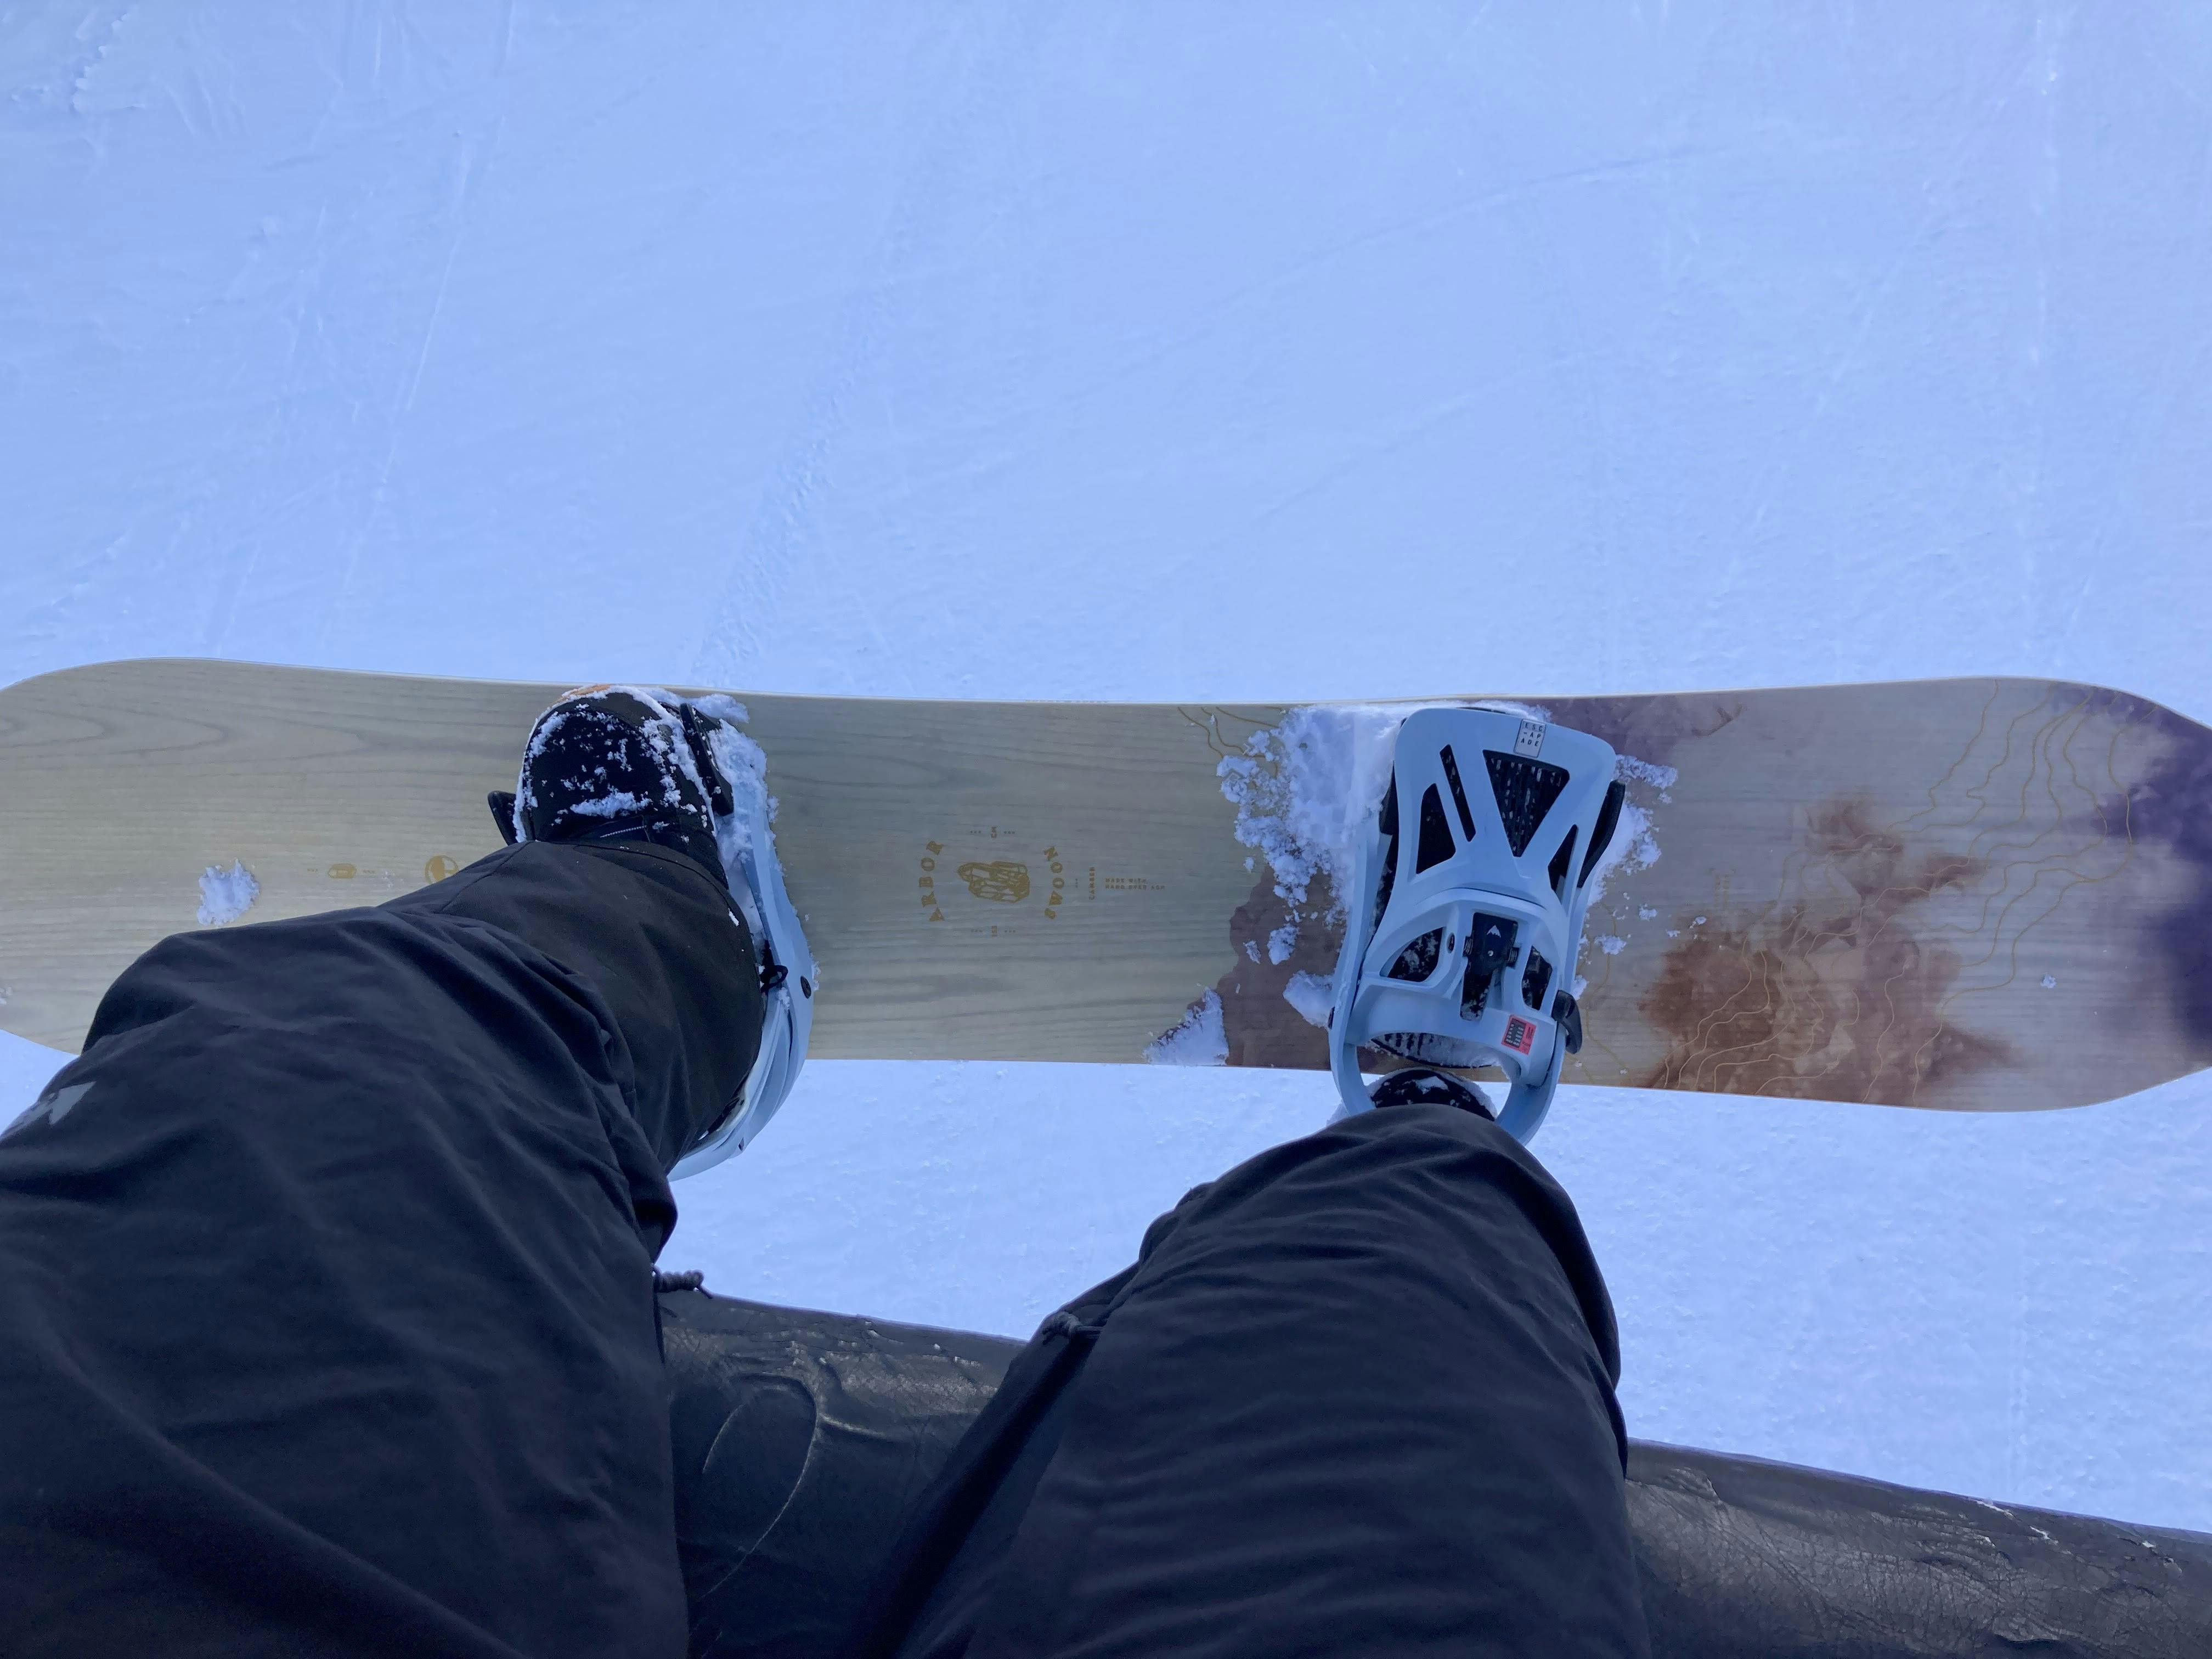 Looking down at a snowboarder's board, feet and bindings while riding up the lift. The left foot is strapped in, while the right is unstrapped.